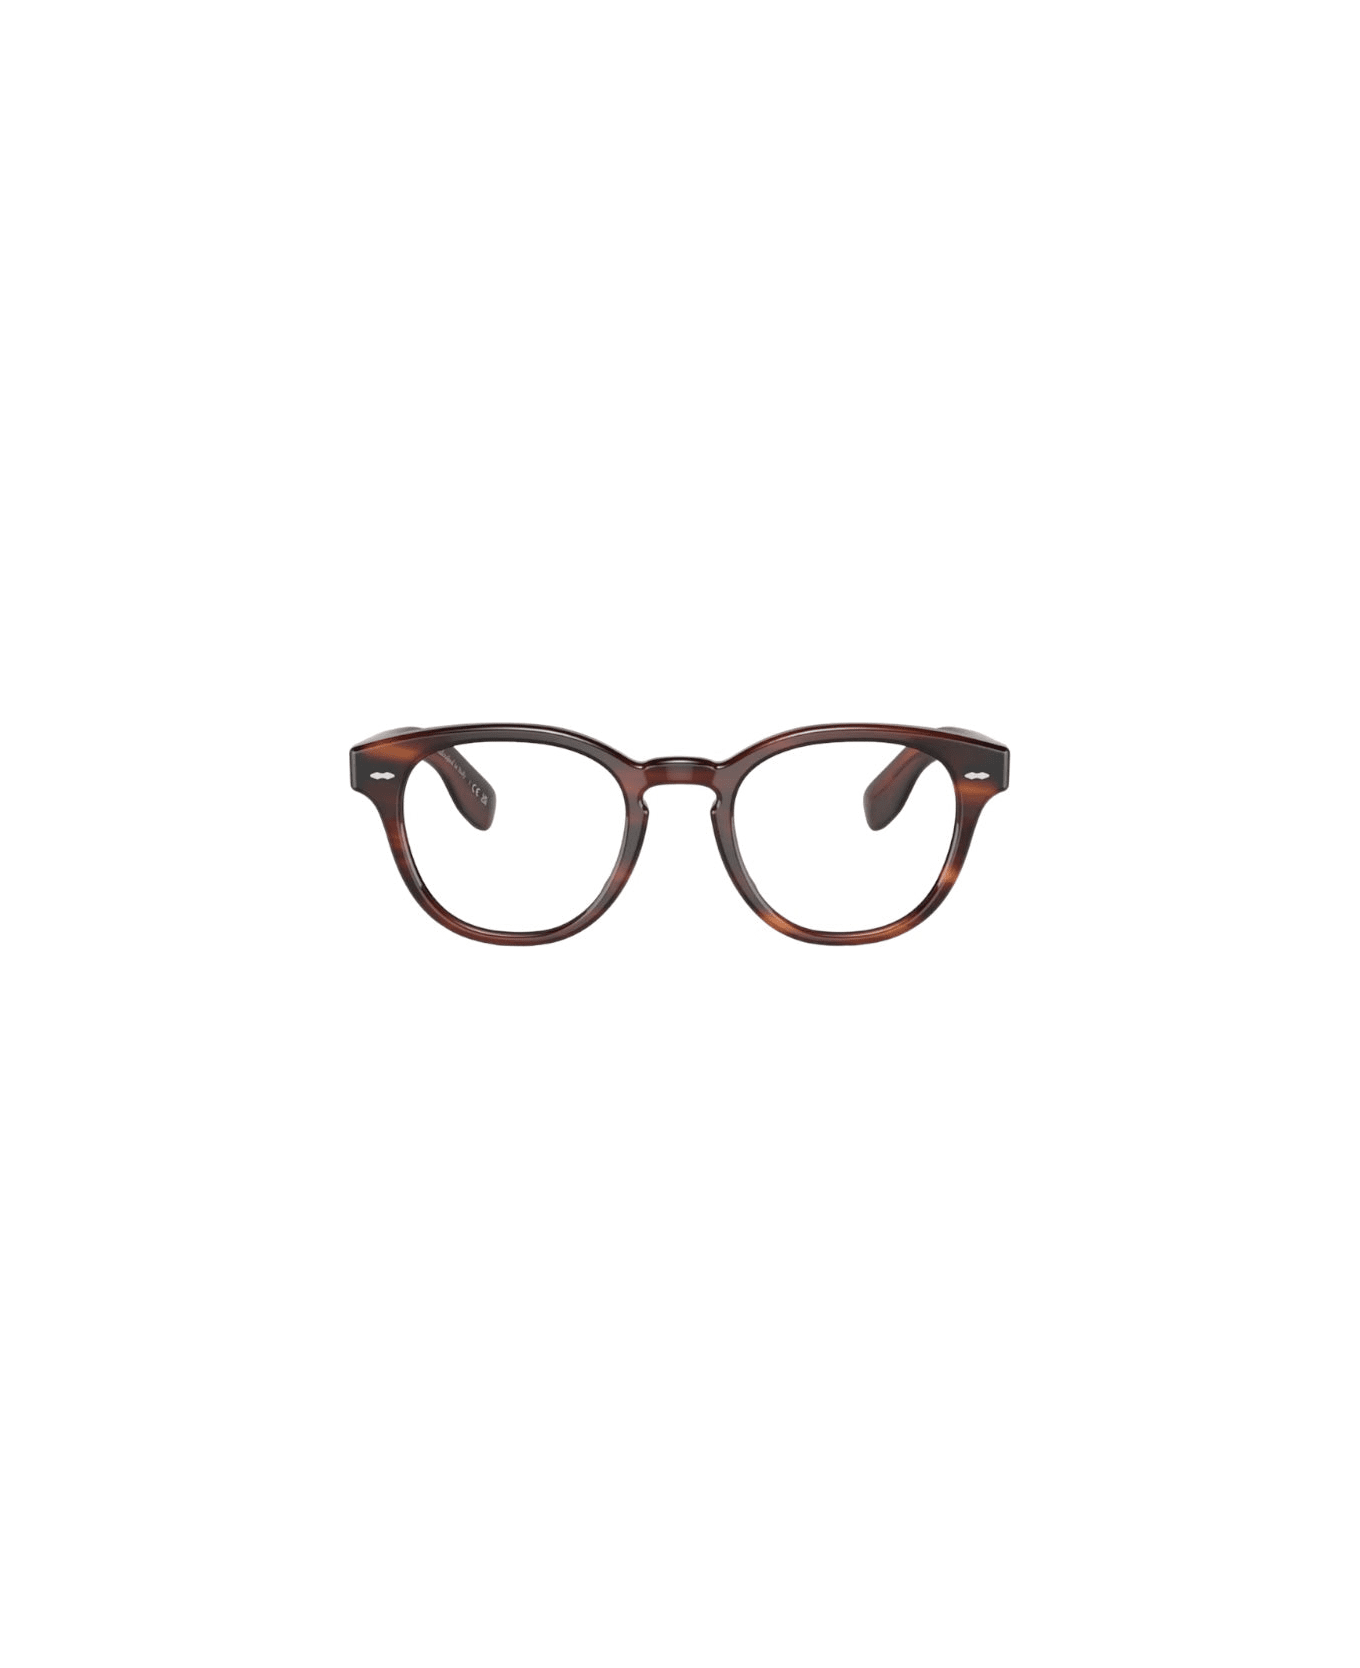 Oliver Peoples Cary Grant - Havana Glasses